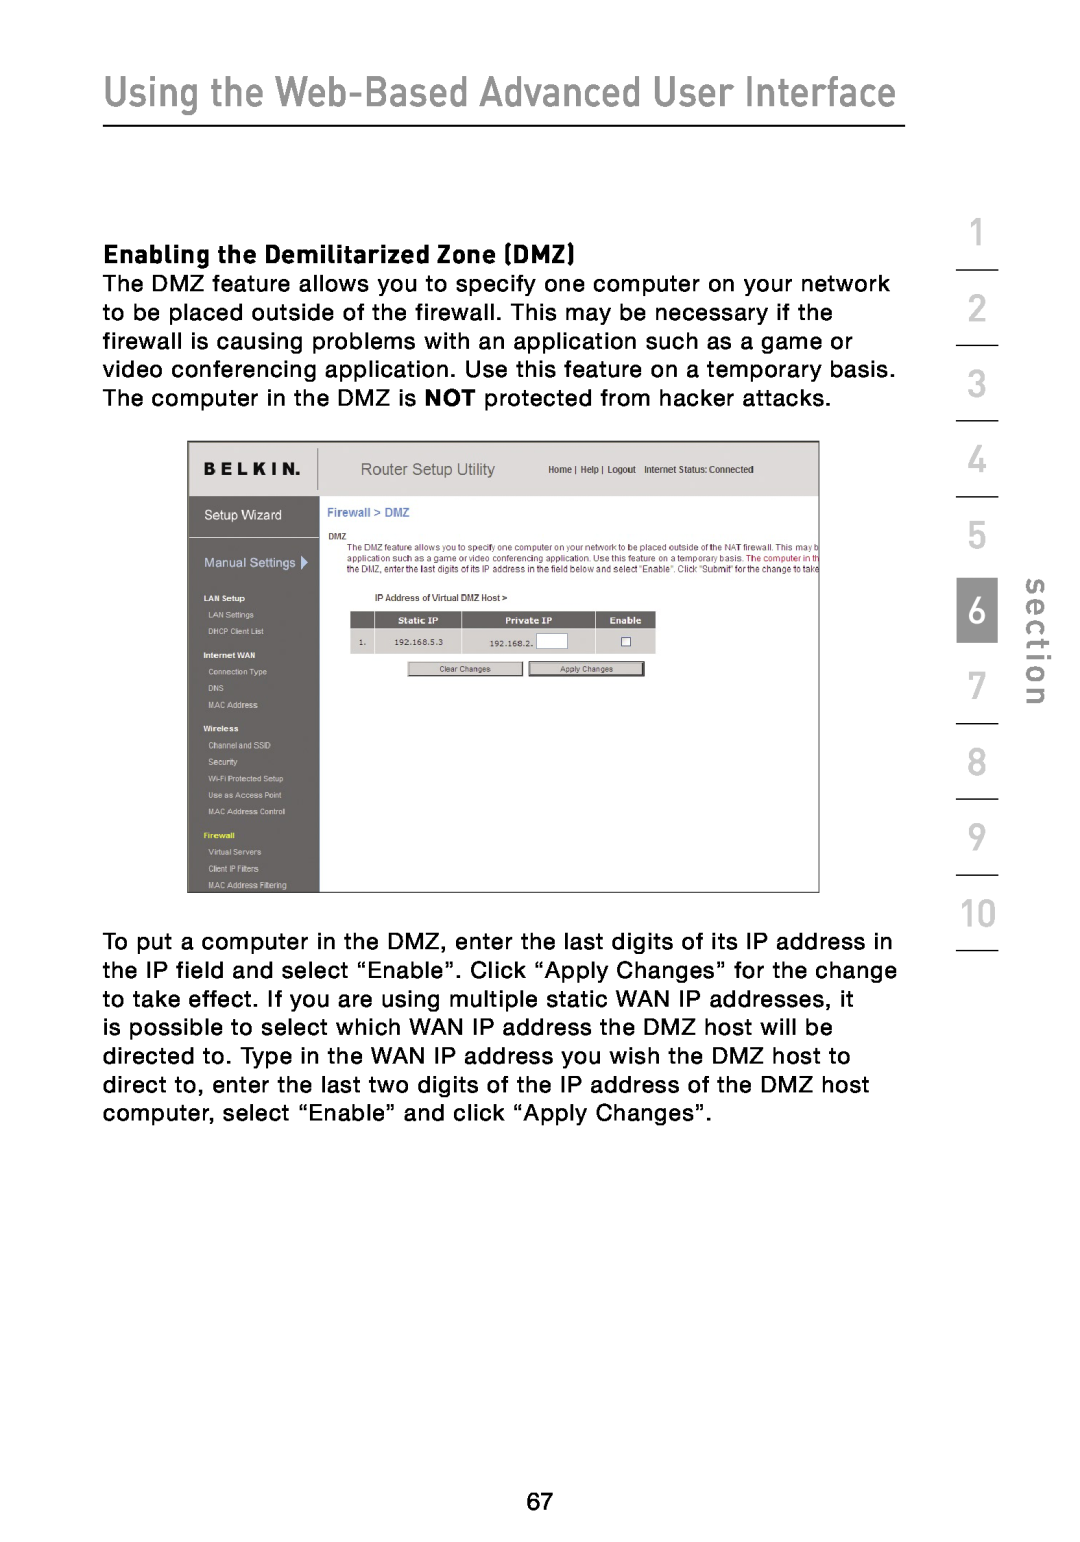 Belkin N1 user manual Enabling the Demilitarized Zone DMZ, Using the Web-Based Advanced User Interface, section 